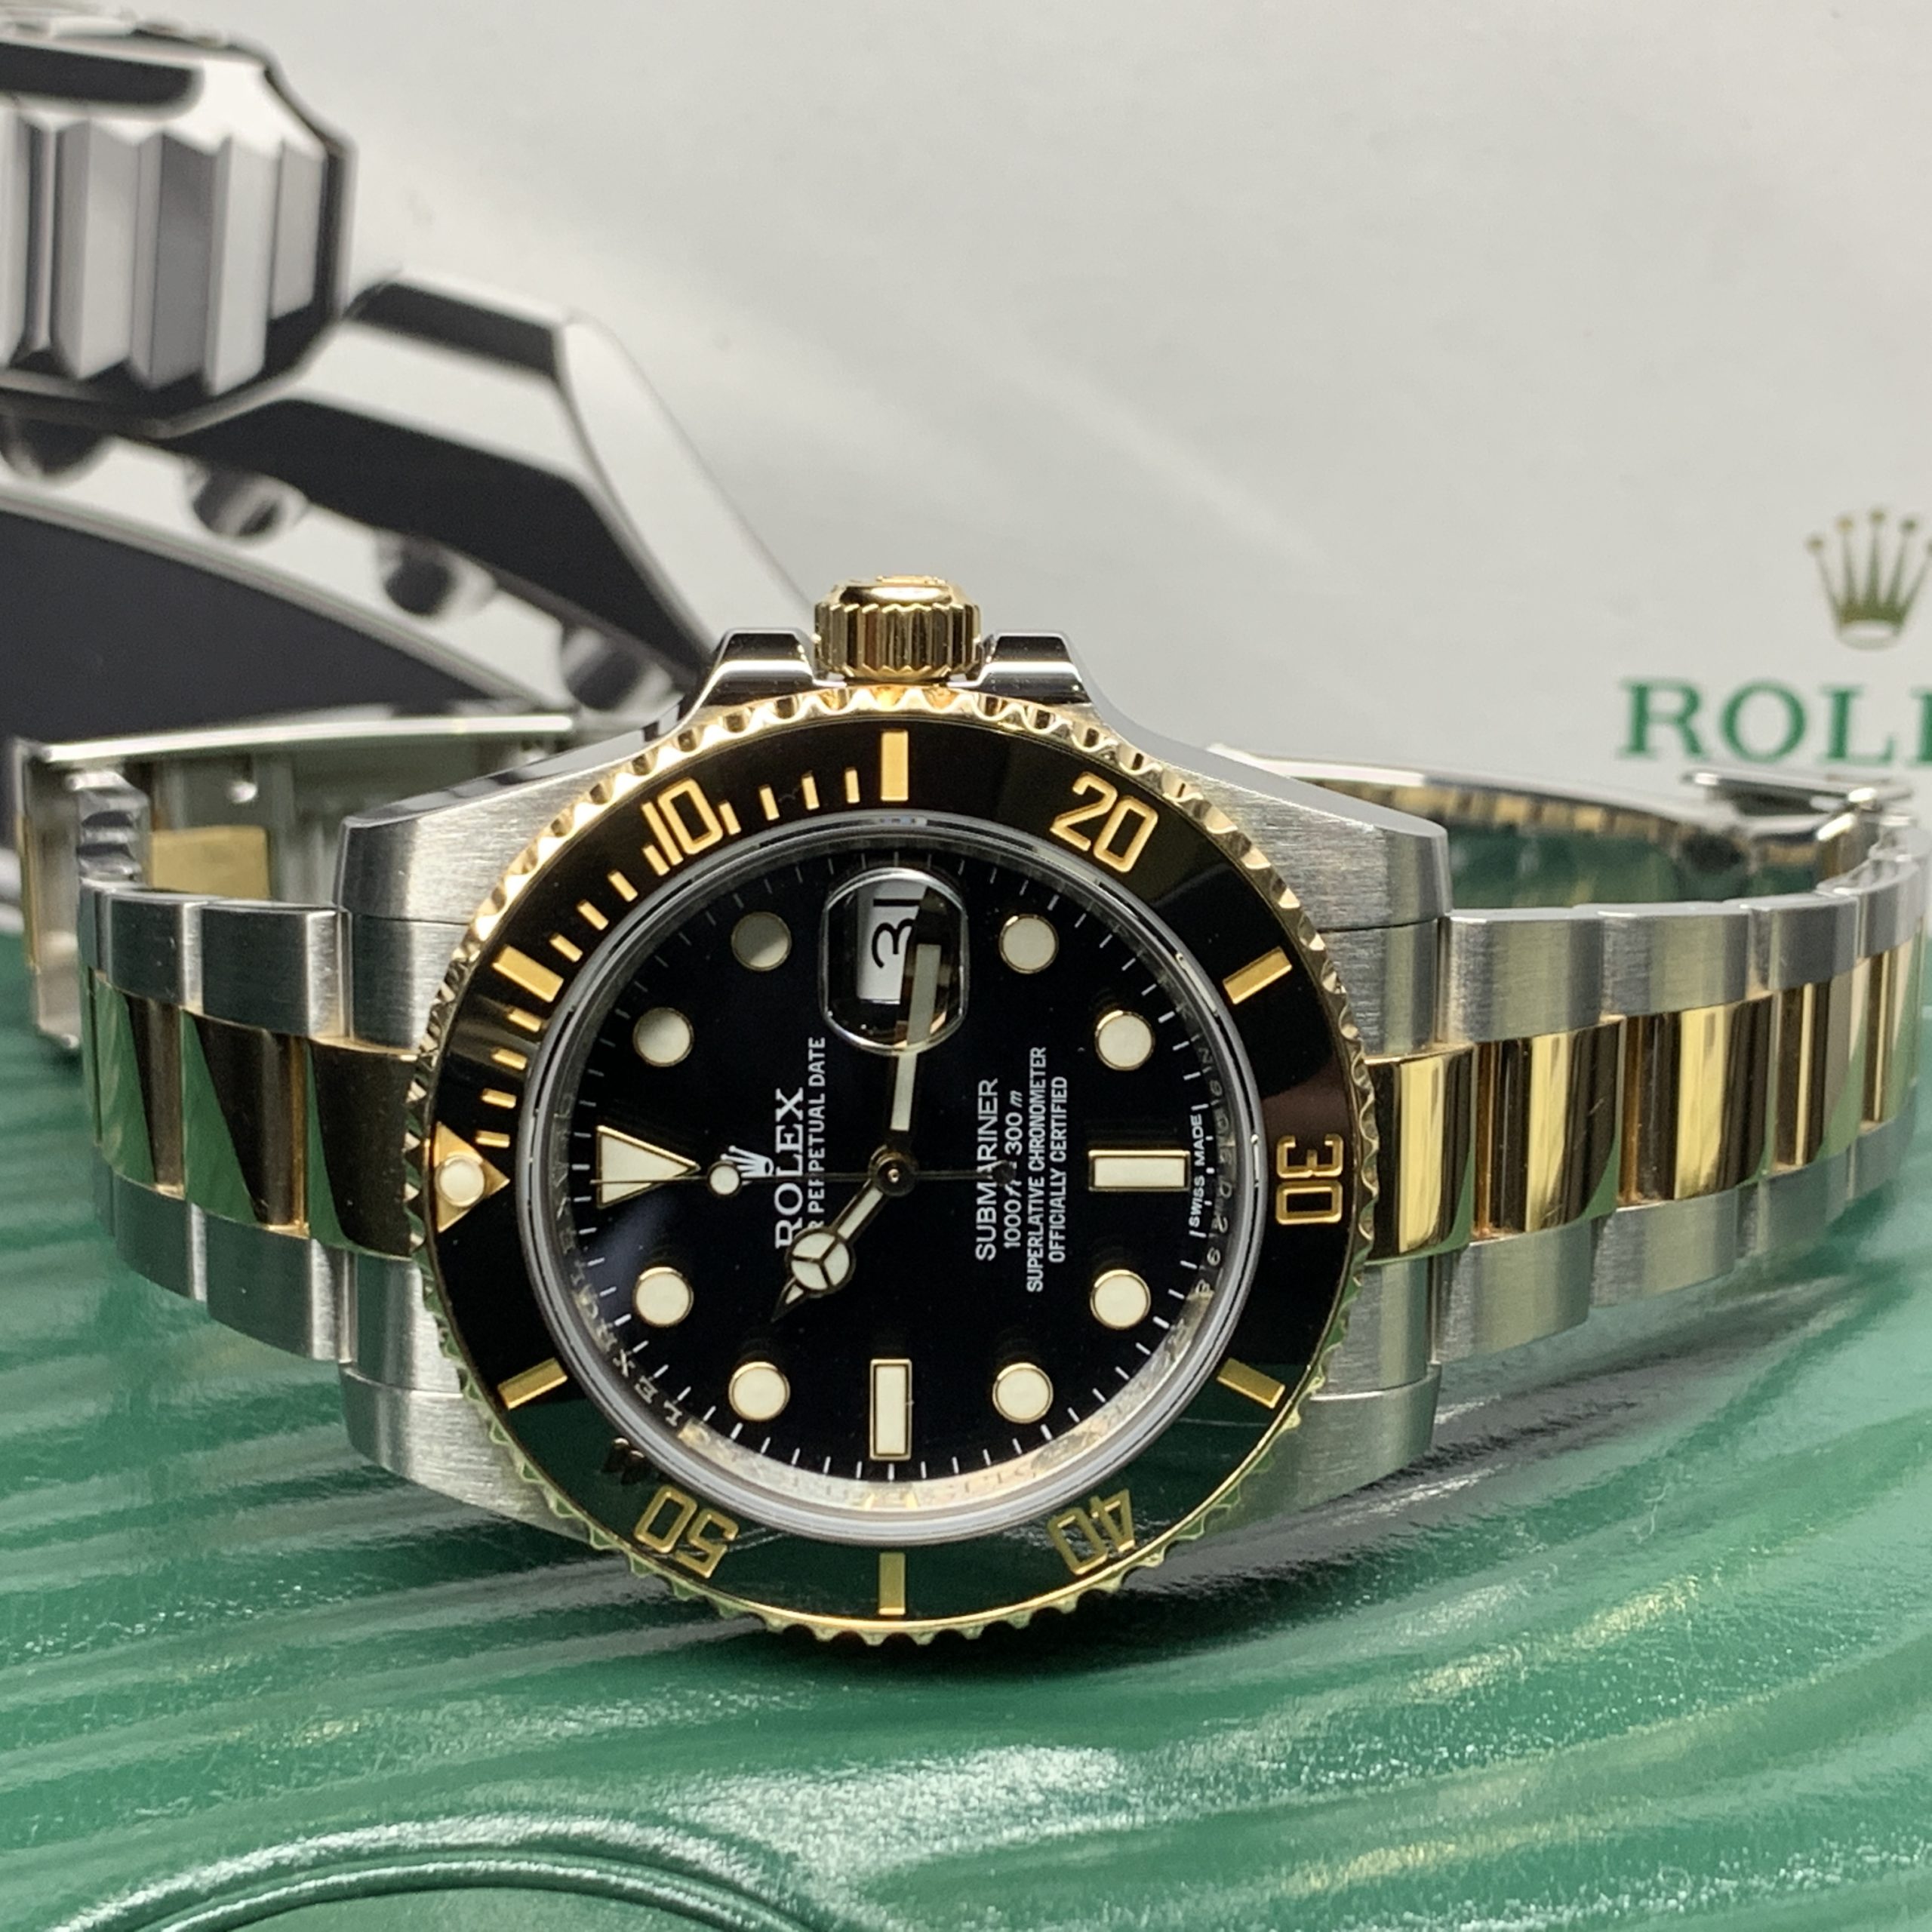 ROLEX SUBMARINER STAINLESS STEEL AND 18CT YELLOW GOLD 116613LN - Carr Rolex Submariner Stainless Steel Price